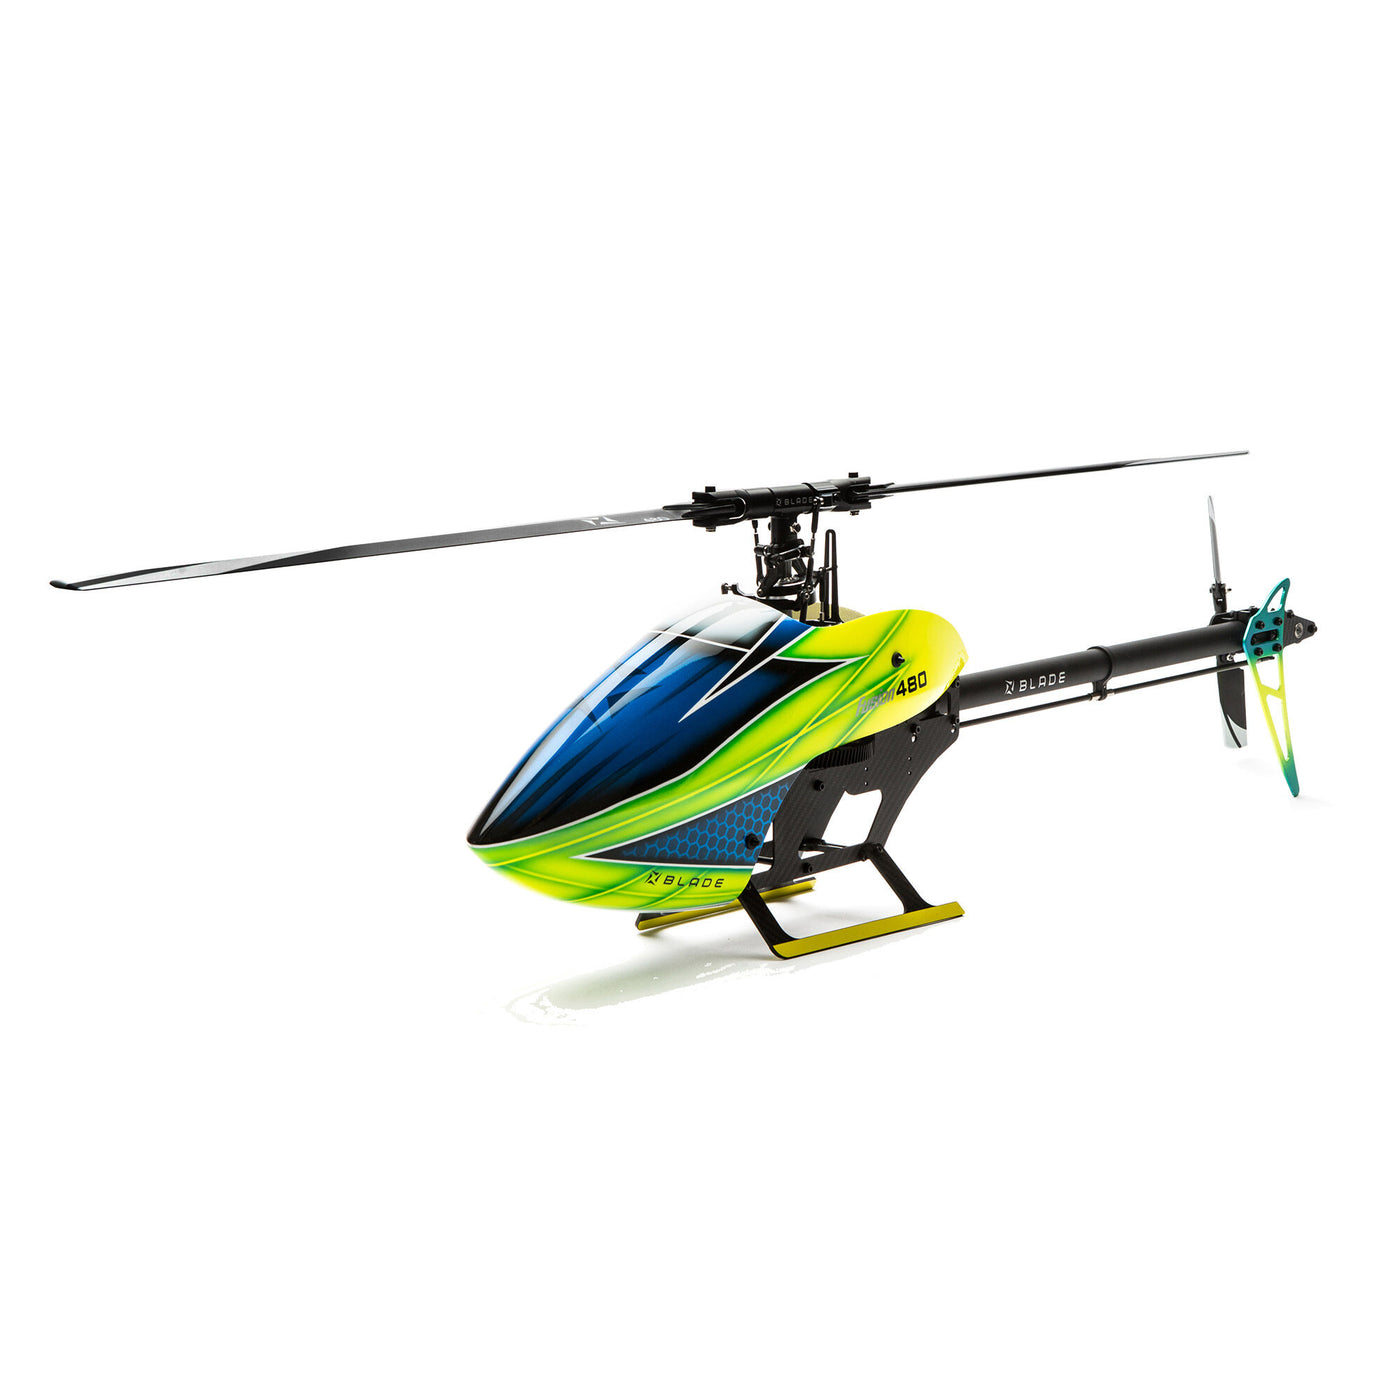 Blade® Fusion 480 Helicopter Kit